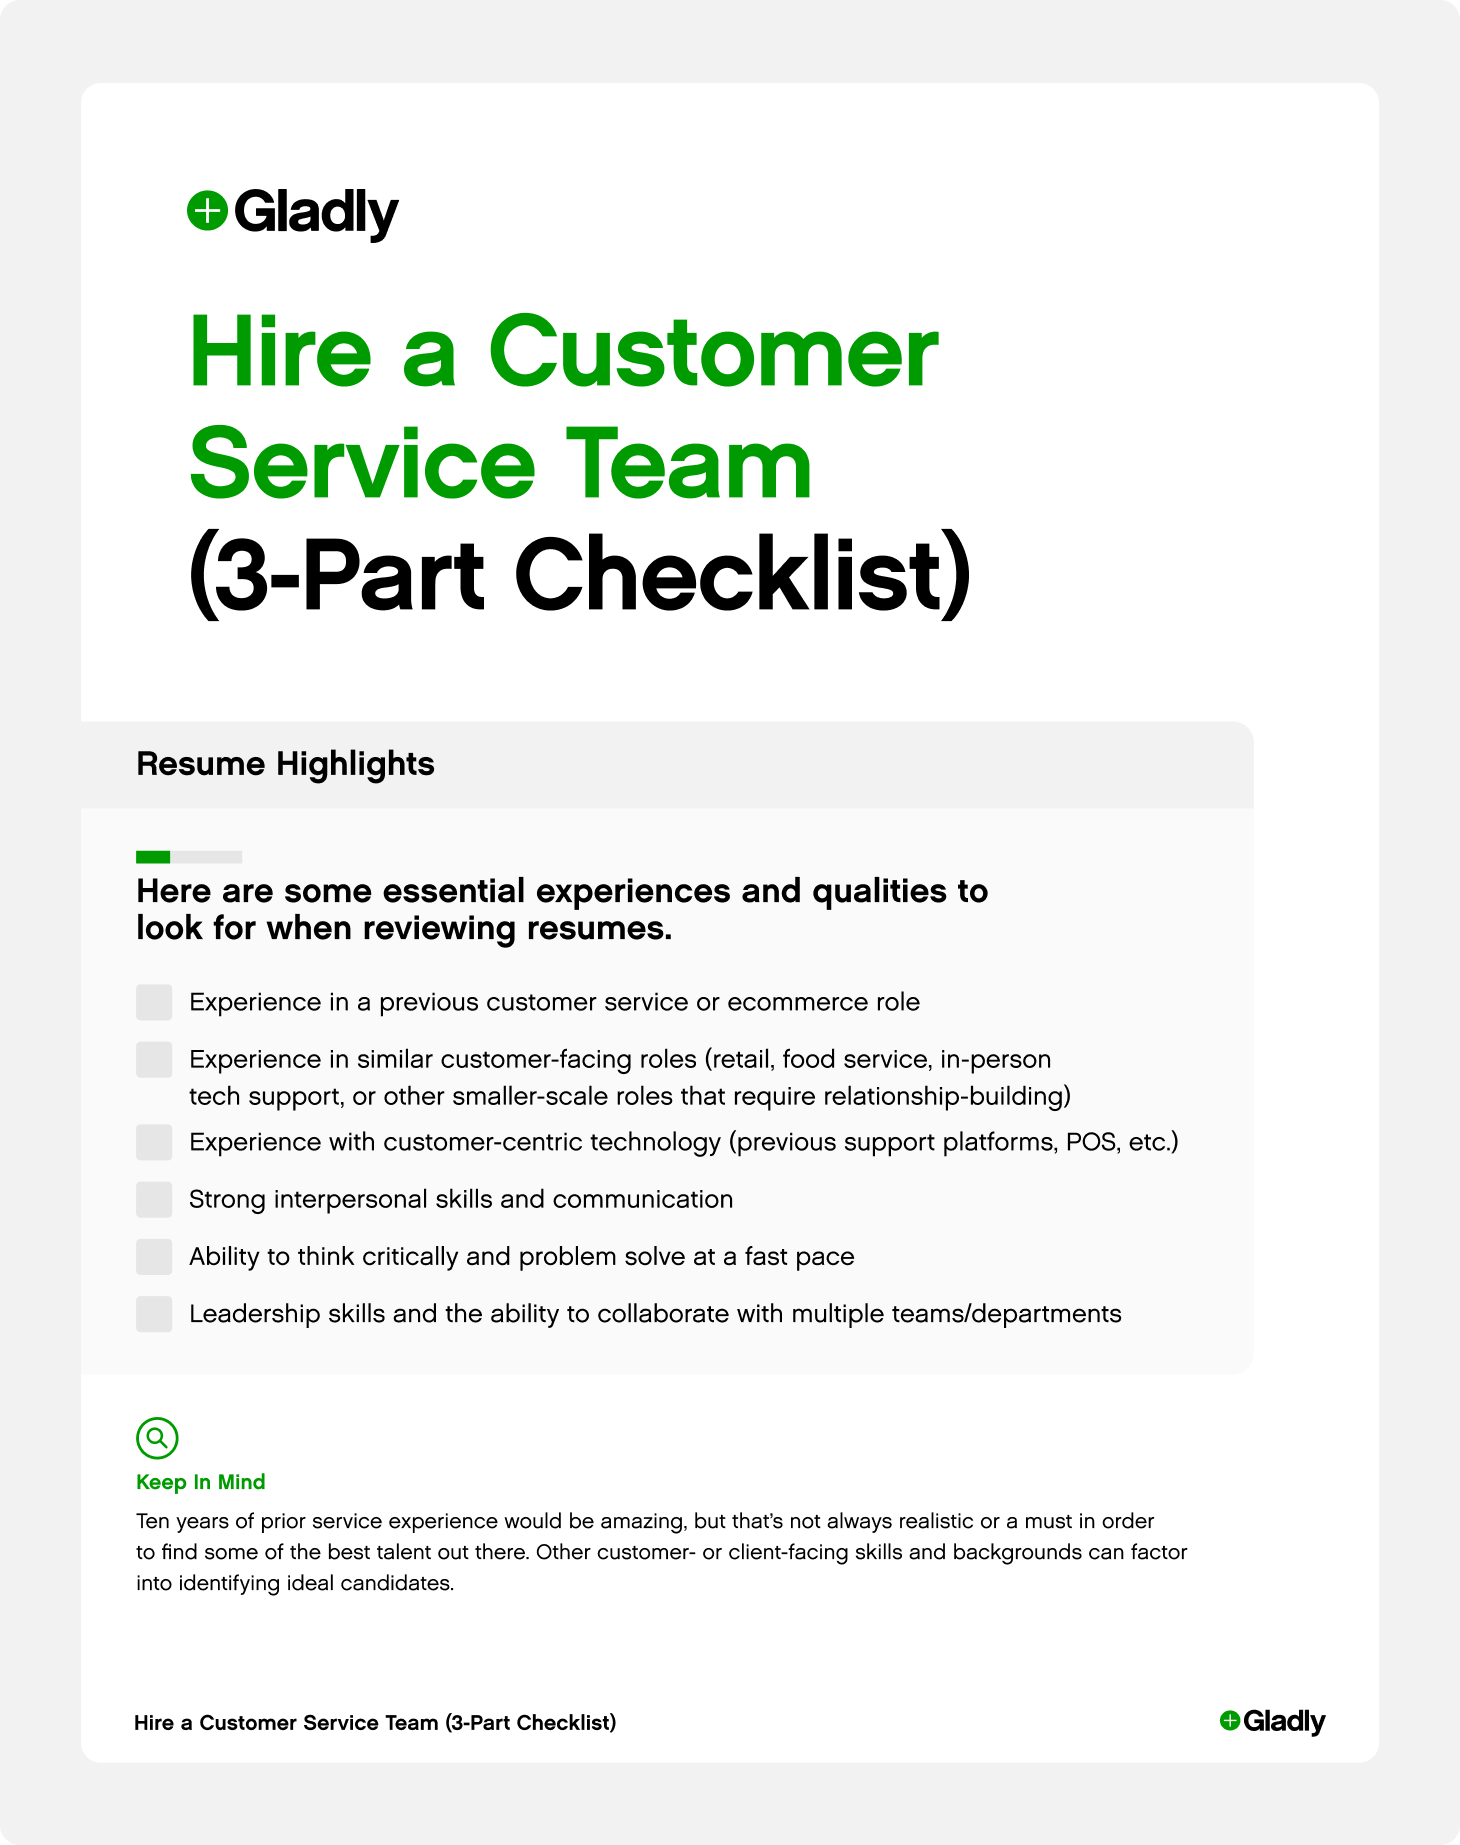 How to Hire a Customer Service Team